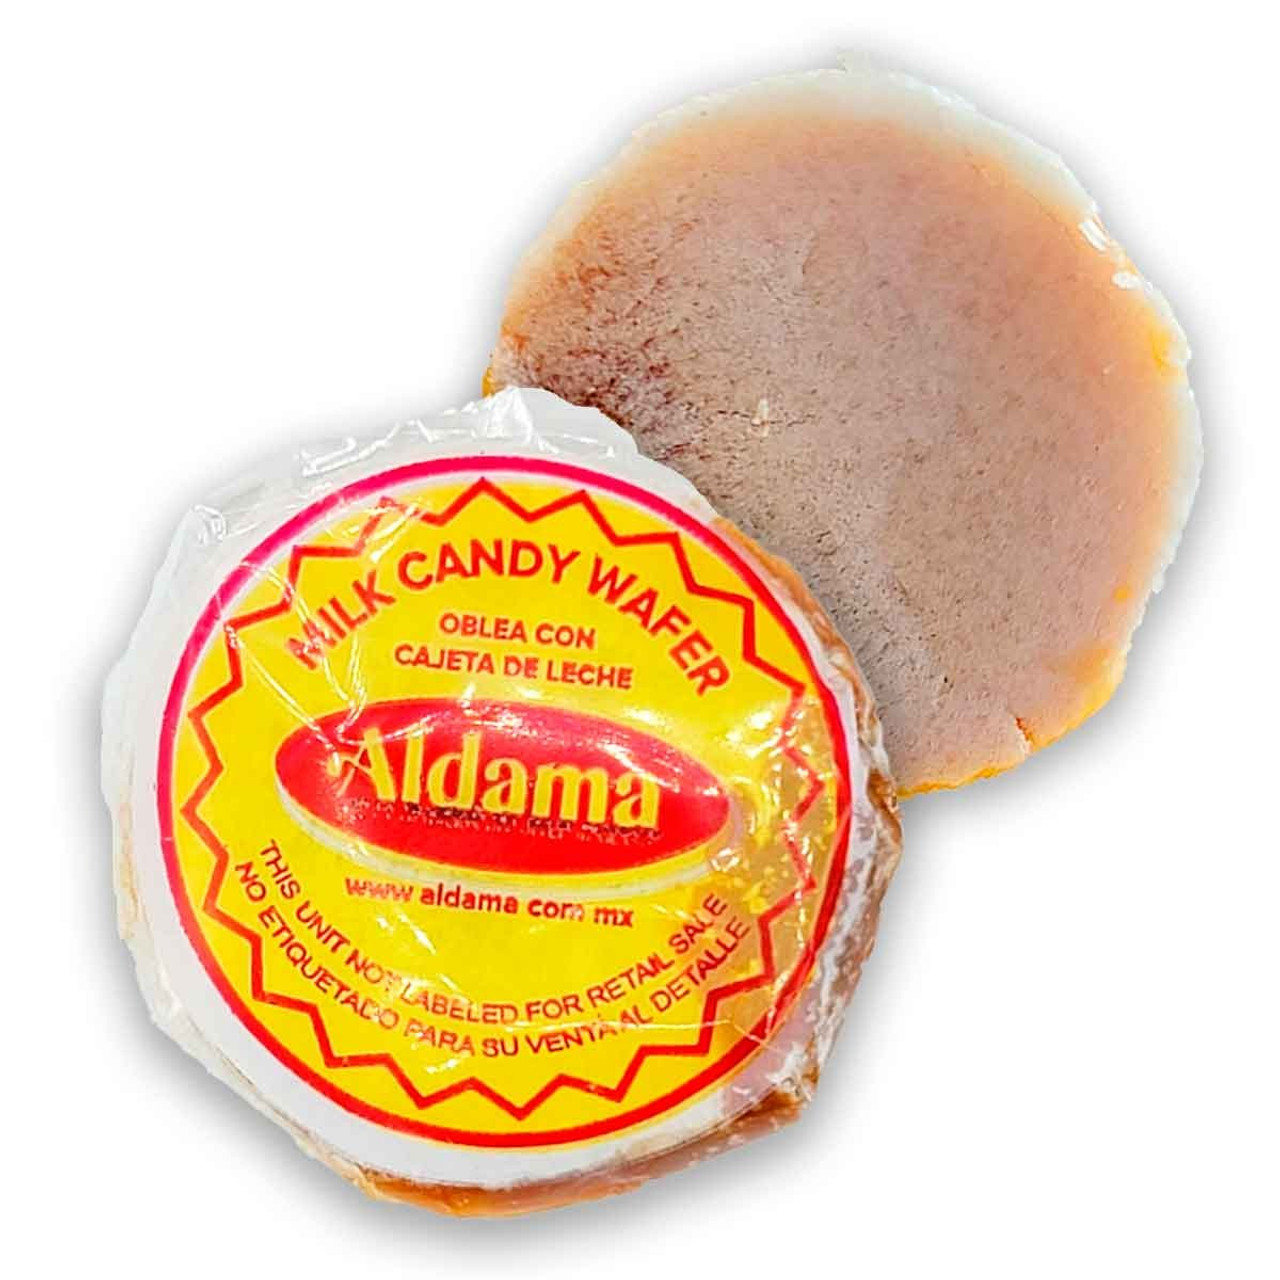 Wafers with goat's milk candy. The classic flavor of the "cajeta" and the crispy flour wafer made it a unique Mexican candy